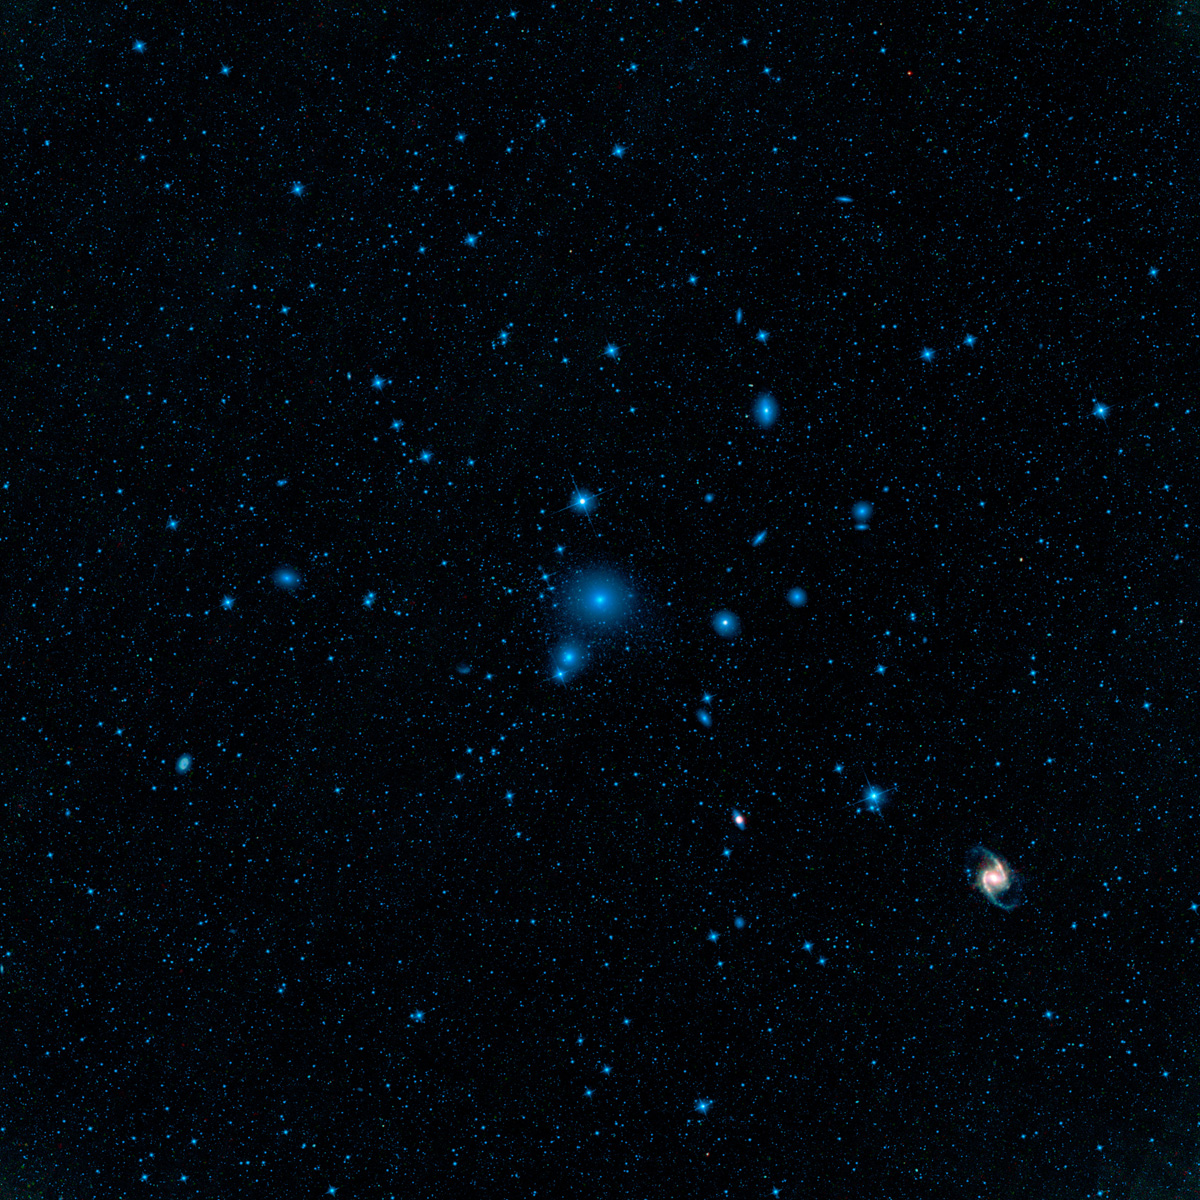 WISE Infrared View of the Fornax Cluster